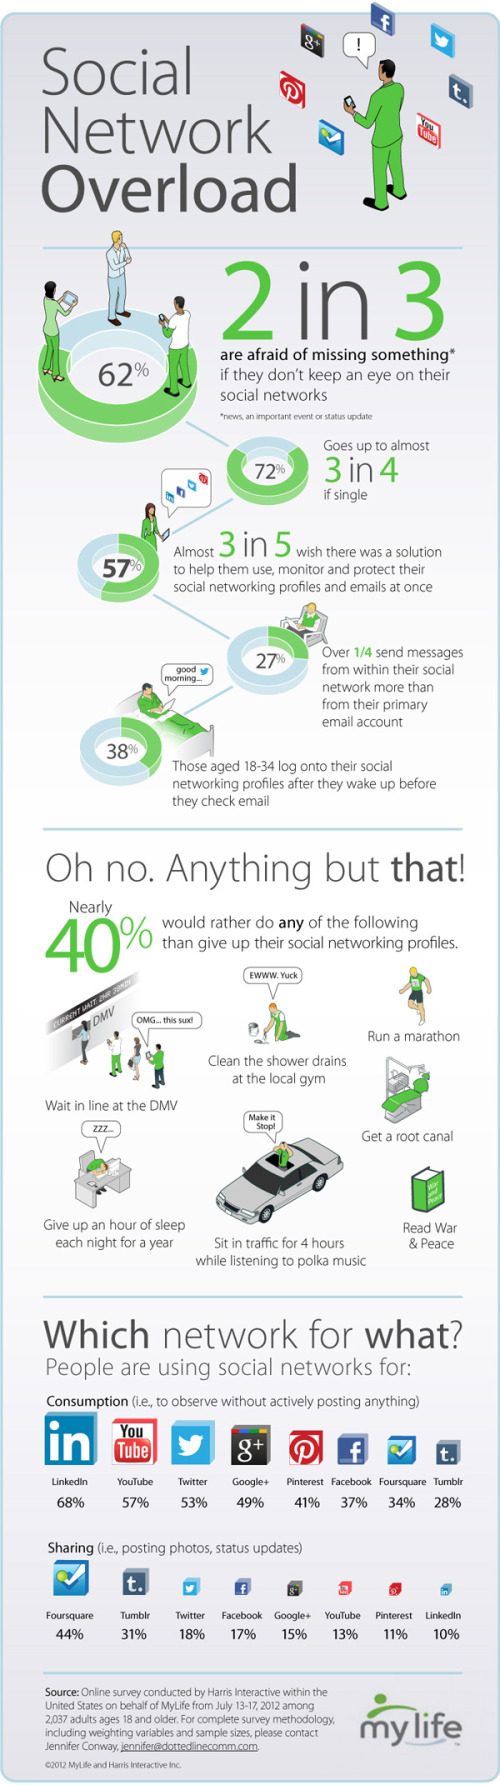 Social Network Overload infographic